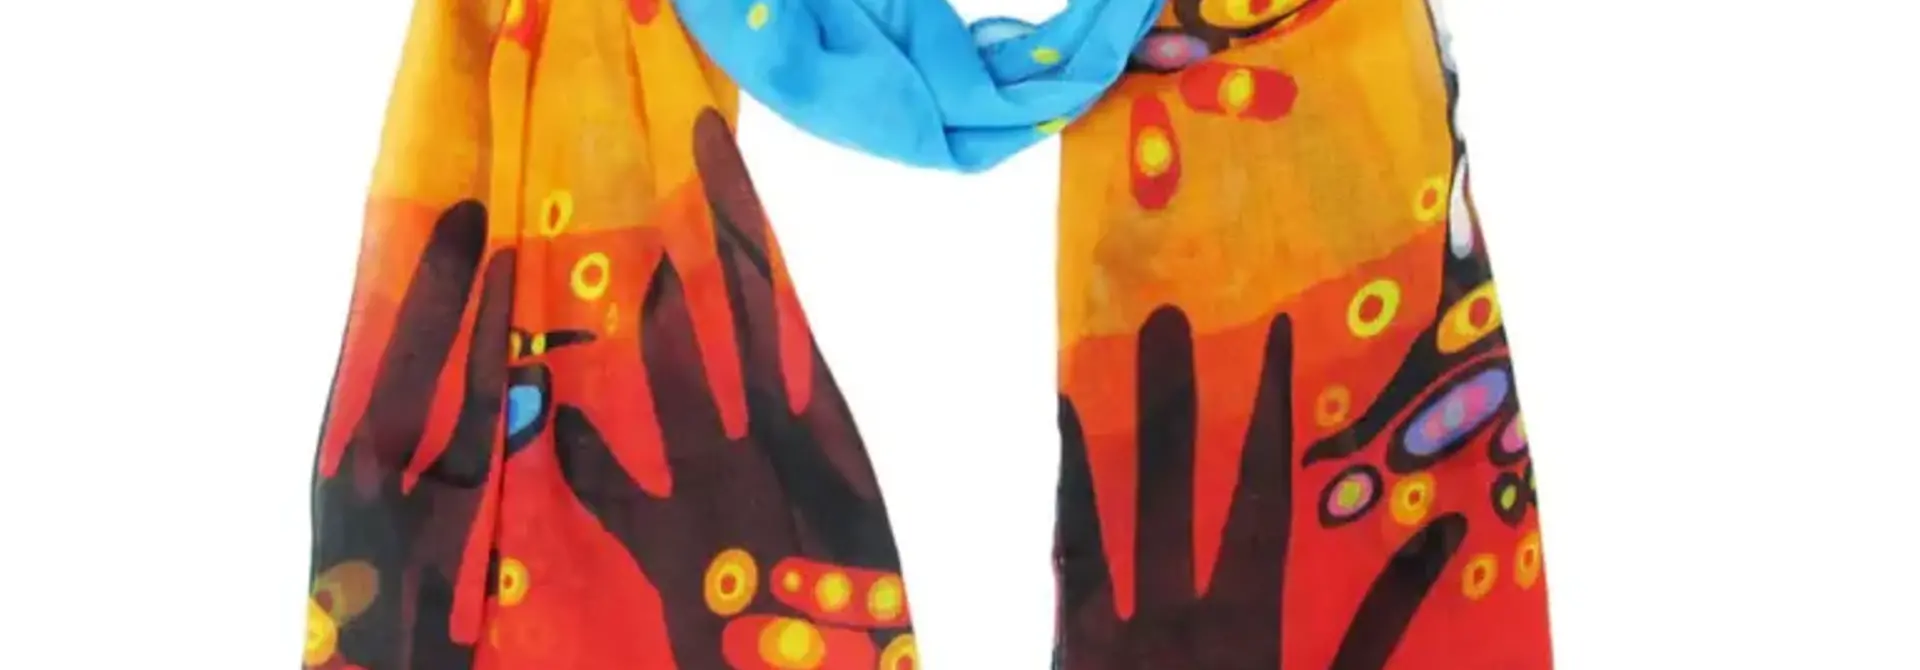 Eco Scarf - Remember Every Child Matters by John Rombough